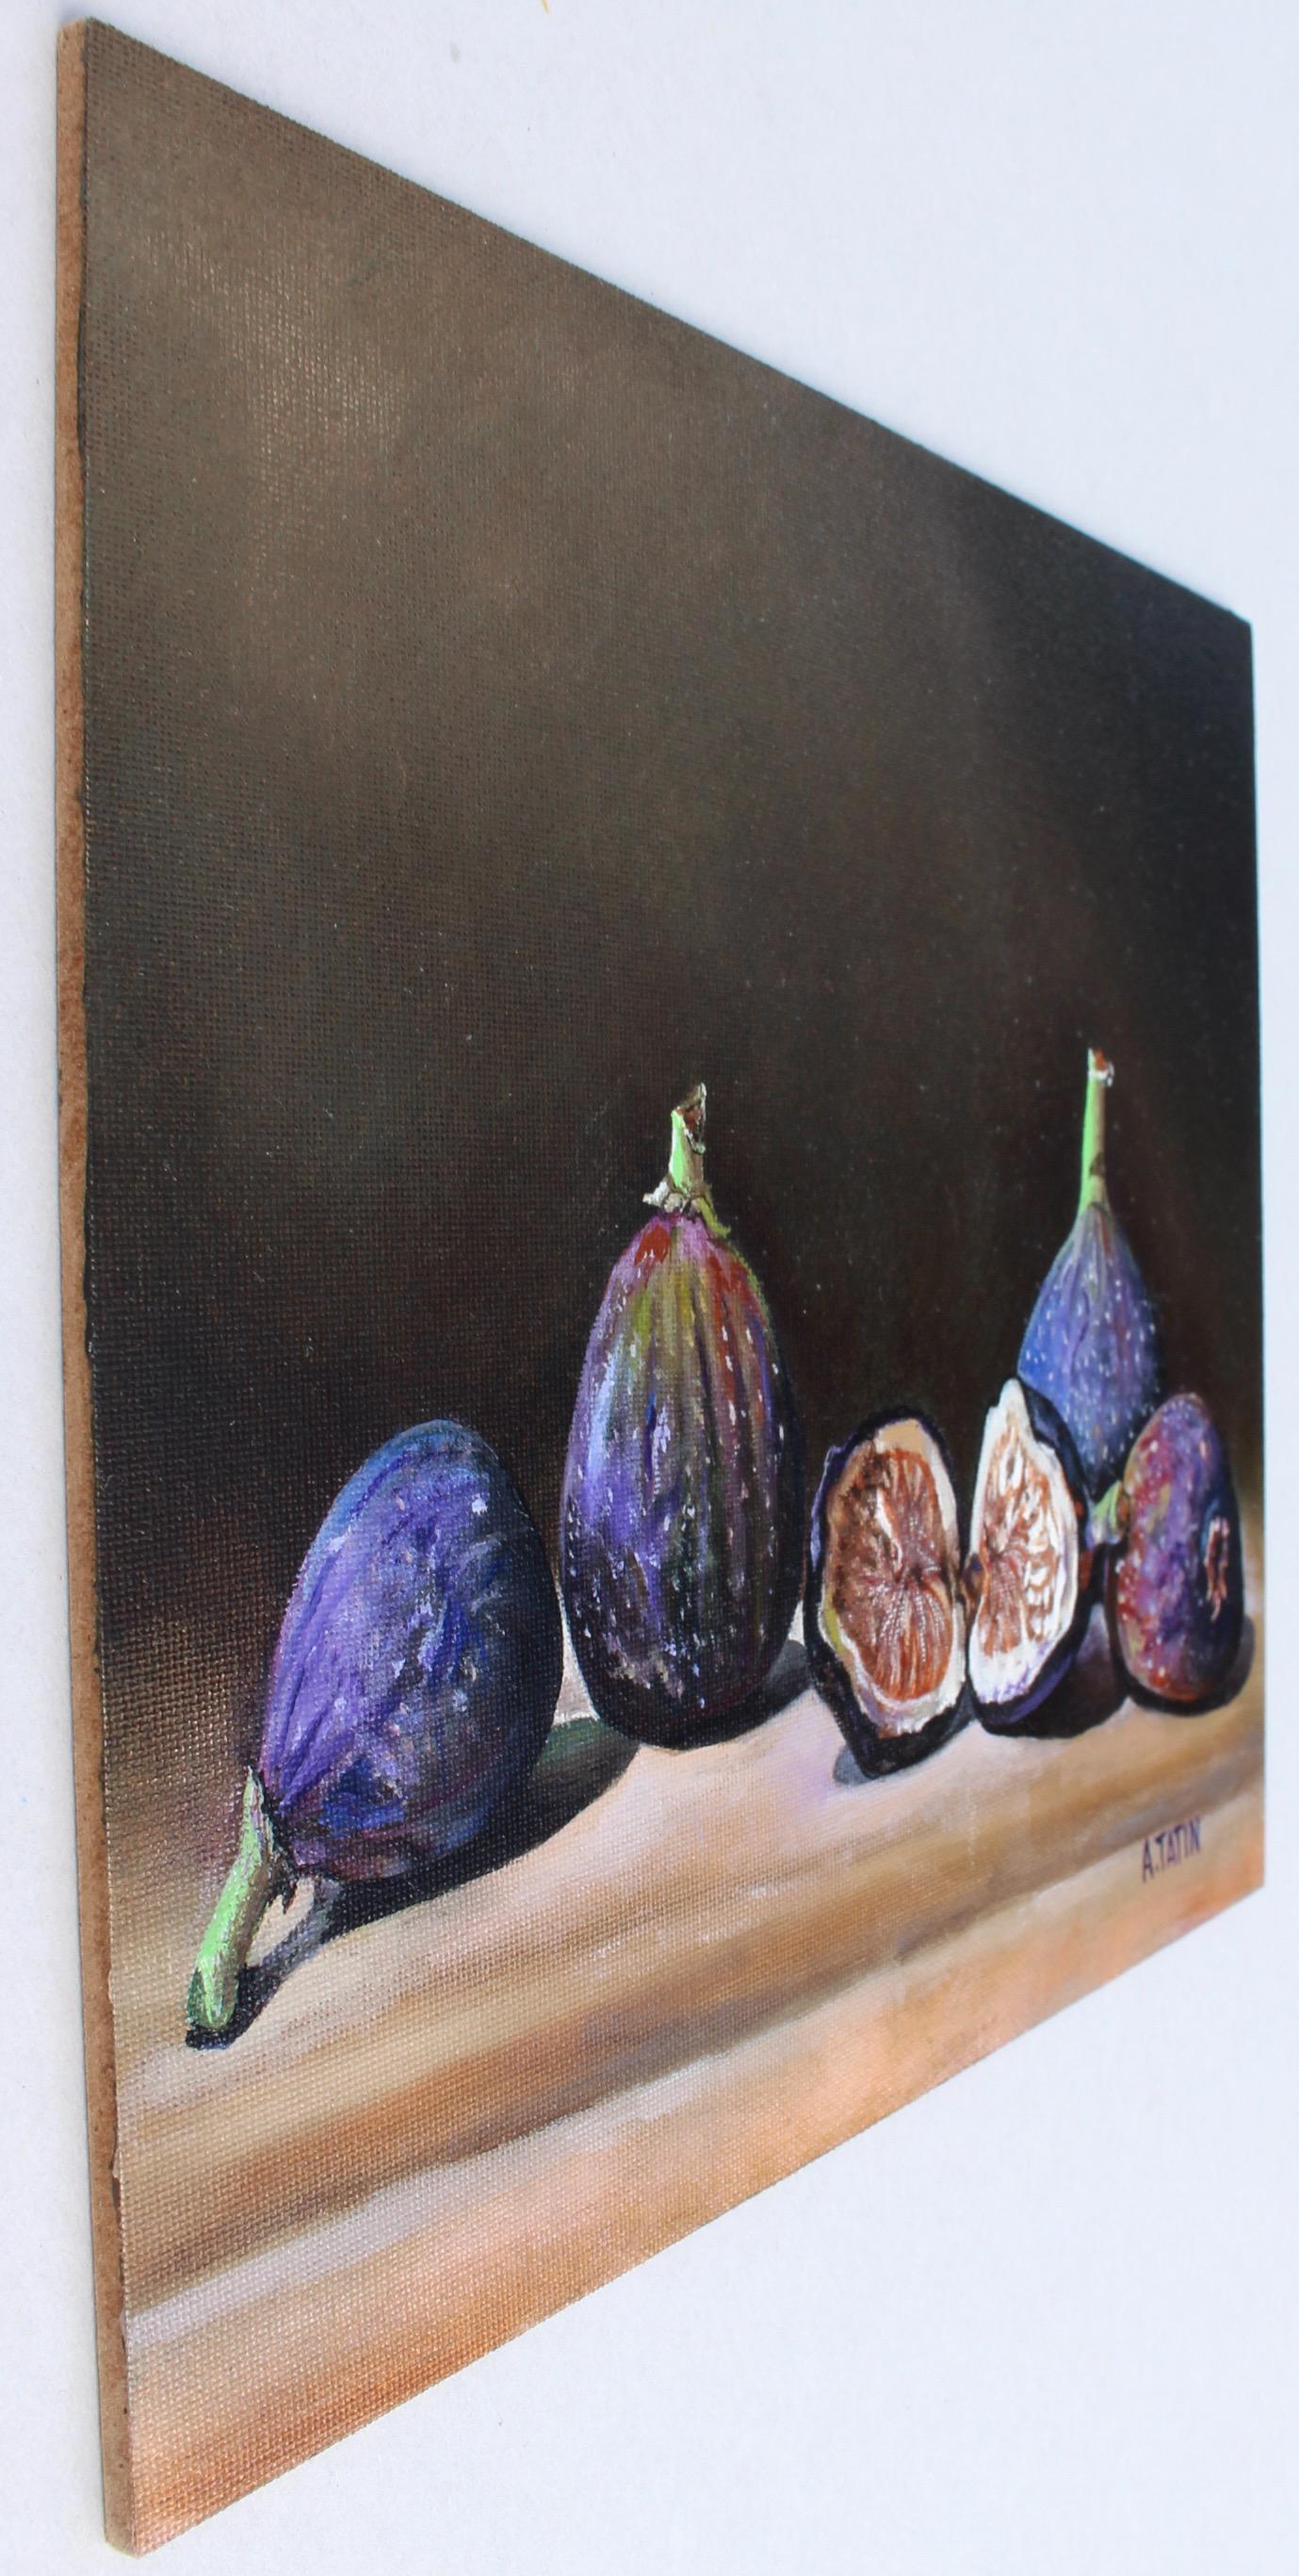 Figs, Oil Painting - Black Still-Life Painting by Art Tatin